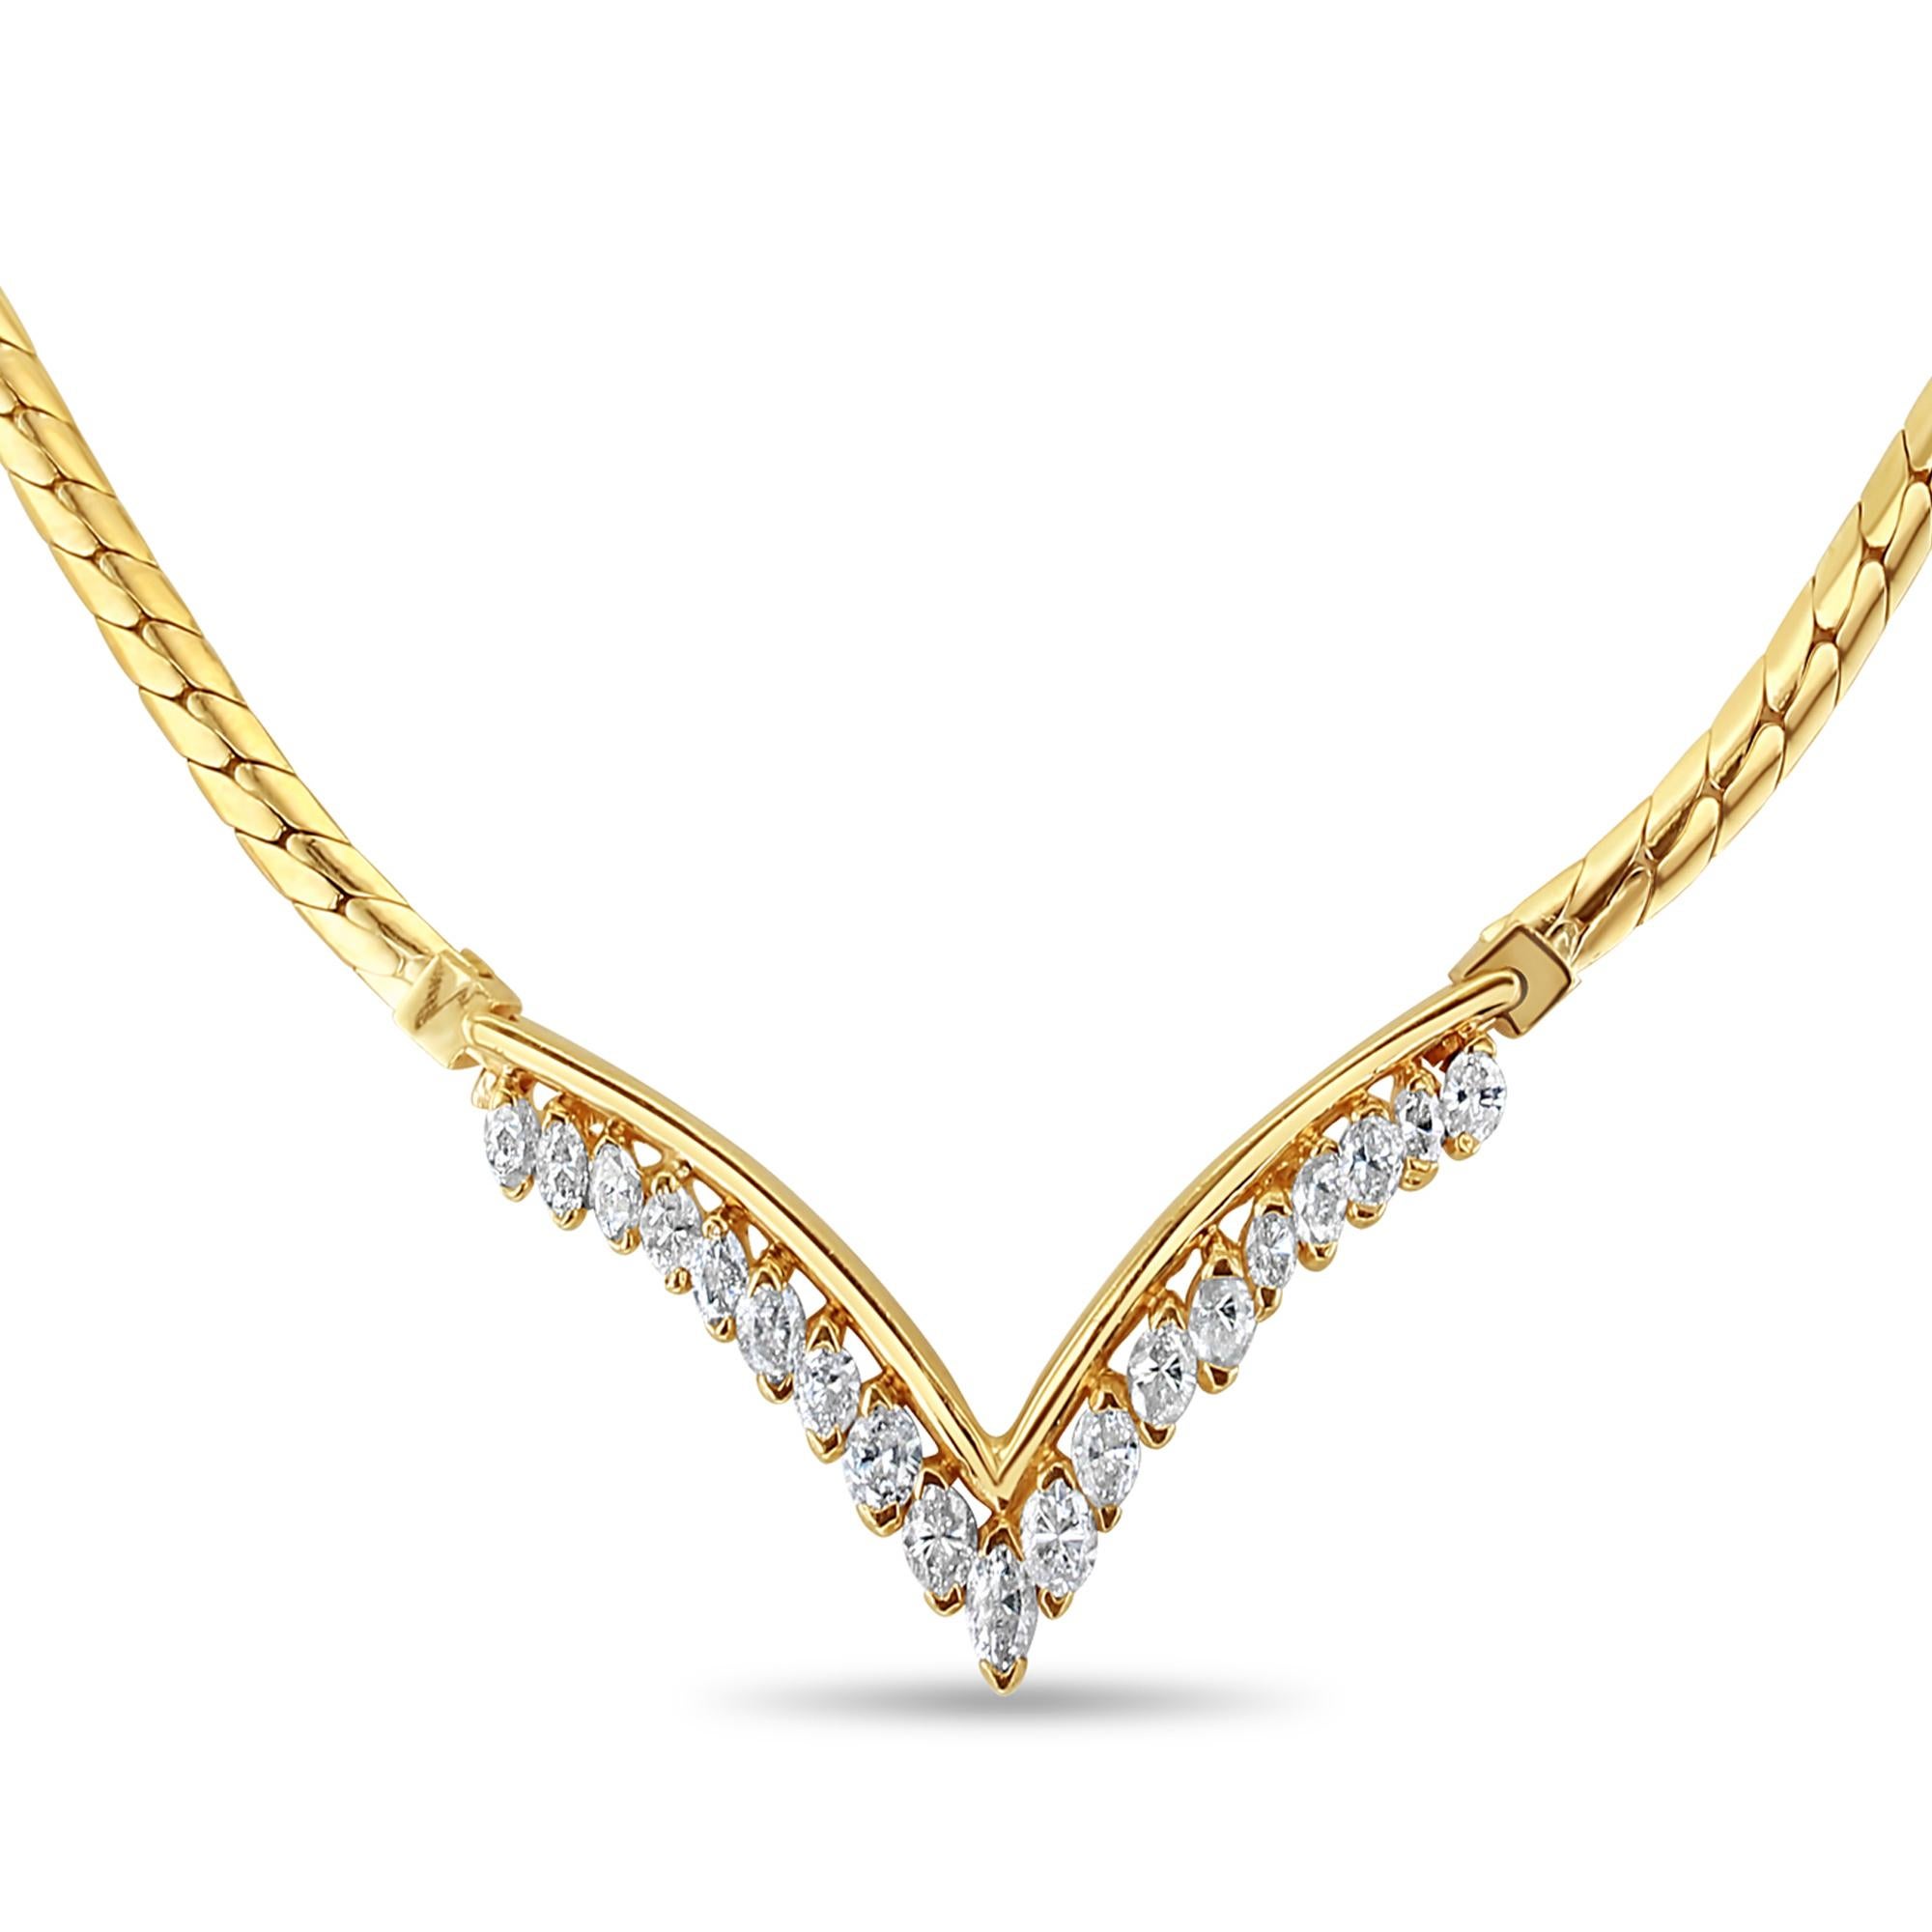 Marquise 'V' Shaped Diamond Necklace 1.75cttw 14k Yellow Gold